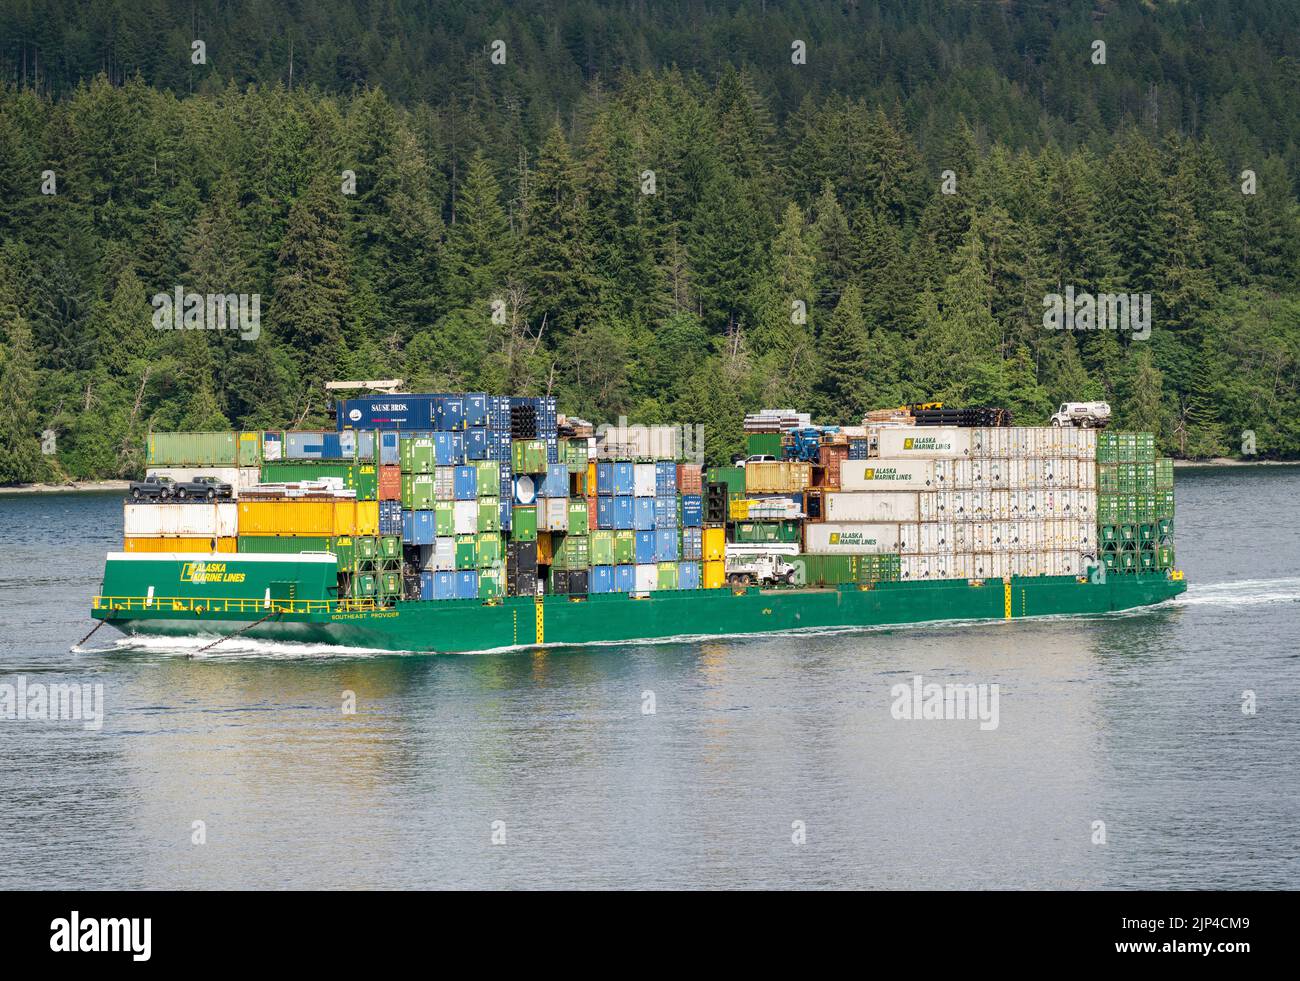 Campbell River, BC - 11 June 2022: Containers stacked on Alaska Marine Lines barge in Discovery Passage Stock Photo